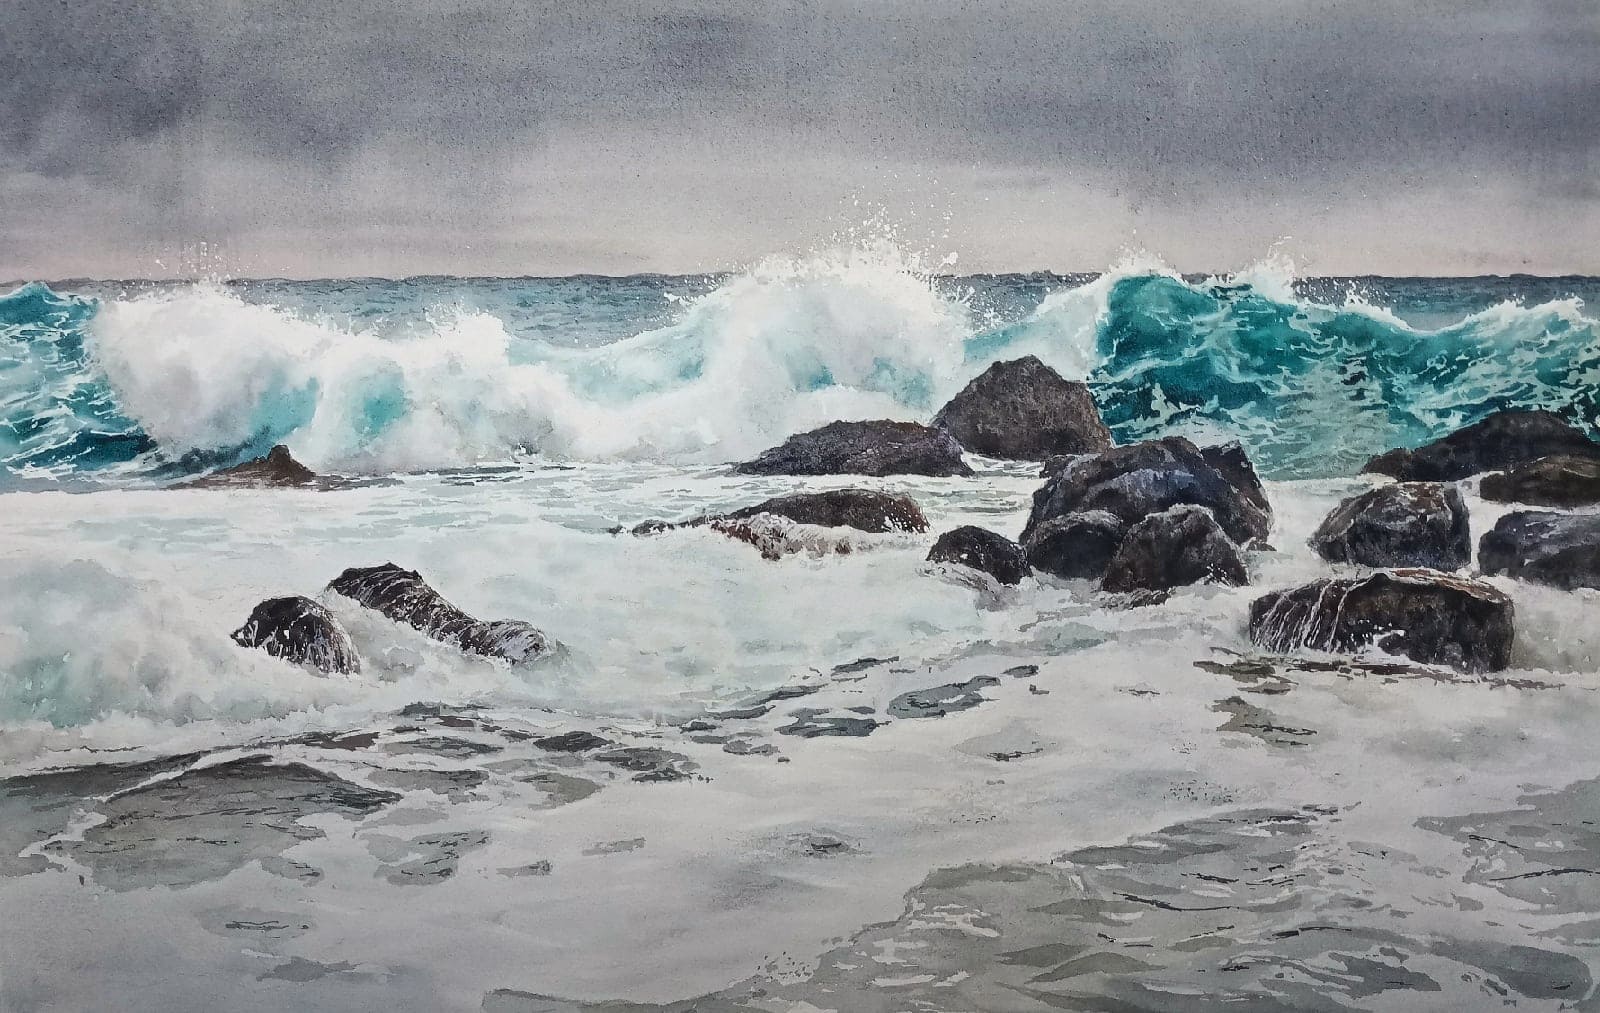 Storm in Turqoise Tones - 1, Natalie Nesterova, Buy the painting Watercolor